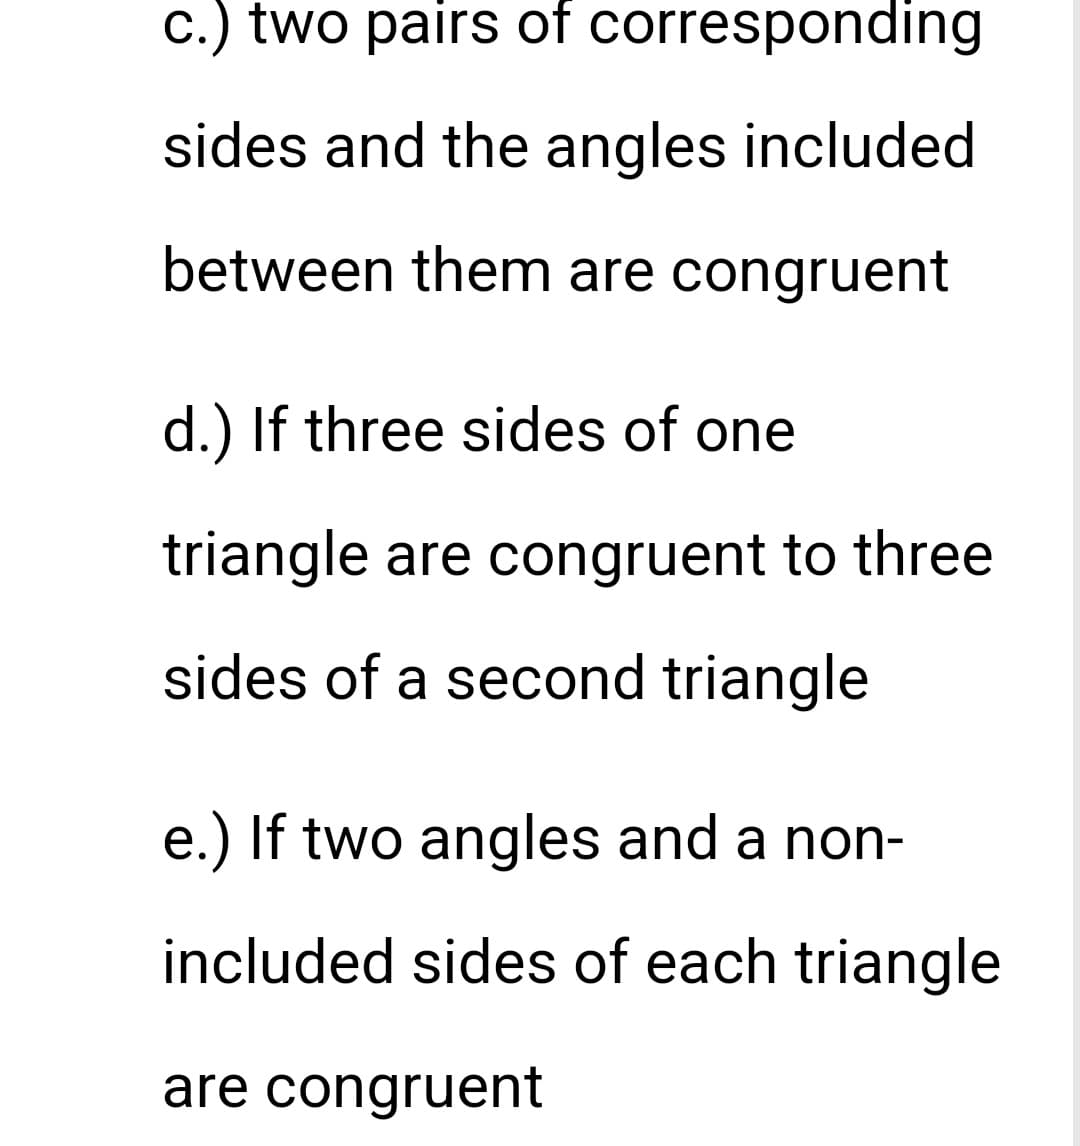 c.) two pairs of corresponding
sides and the angles included
between them are congruent
d.) If three sides of one
triangle are congruent to three
sides of a second triangle
e.) If two angles and a non-
included sides of each triangle
are congruent